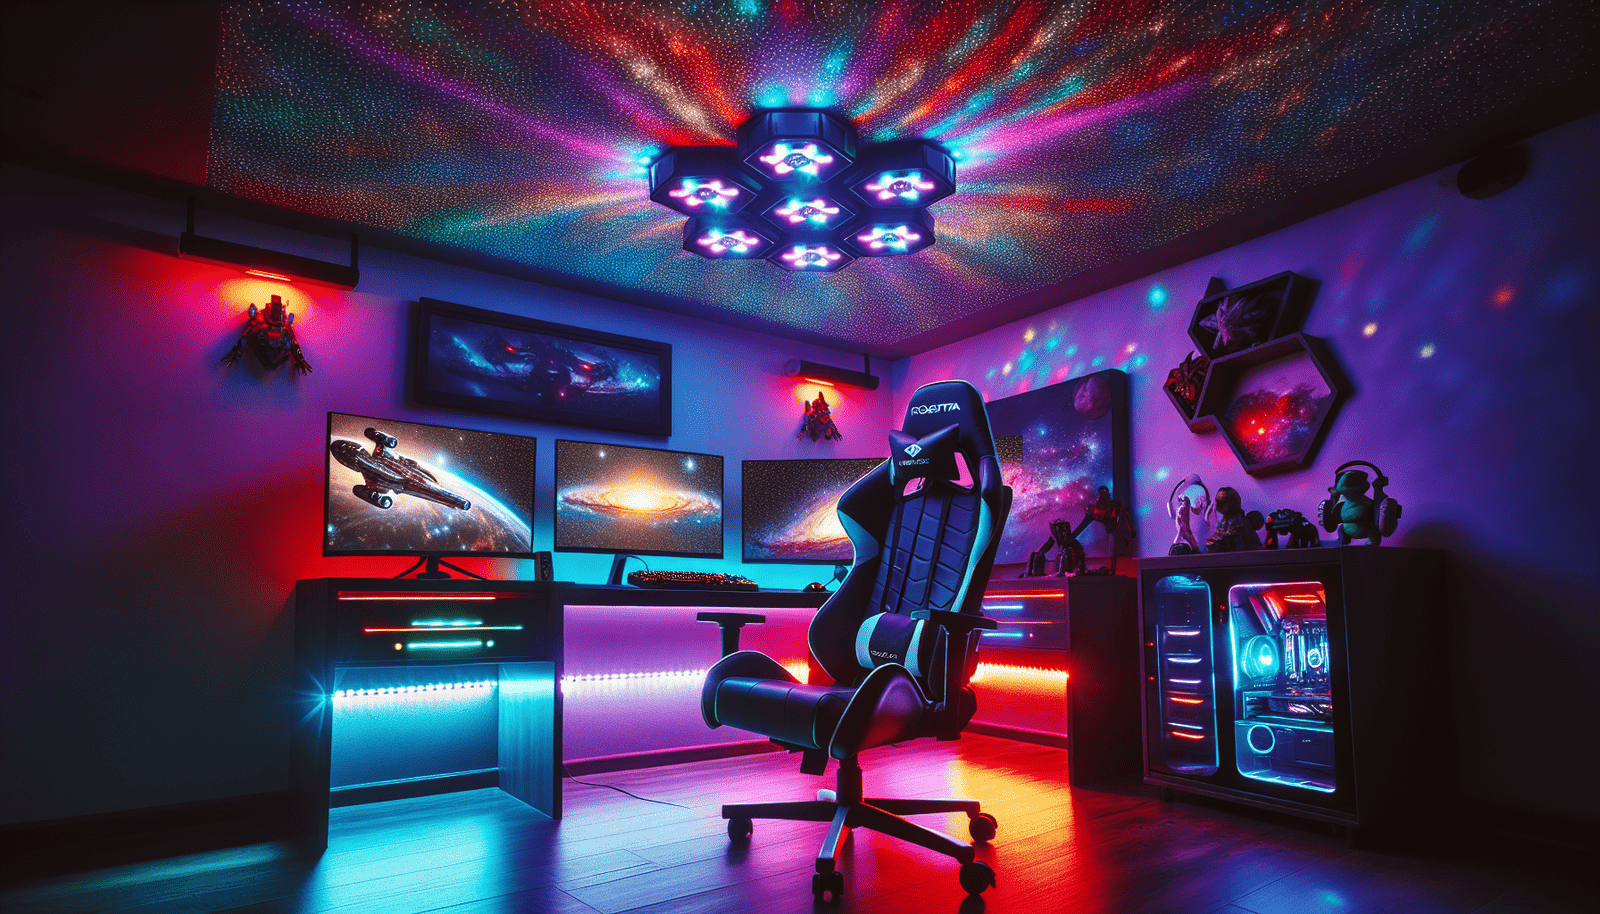 Enhance Their Gaming Setup with LED strip lights, Rossetta Star Projector, and a comfortable gaming chair